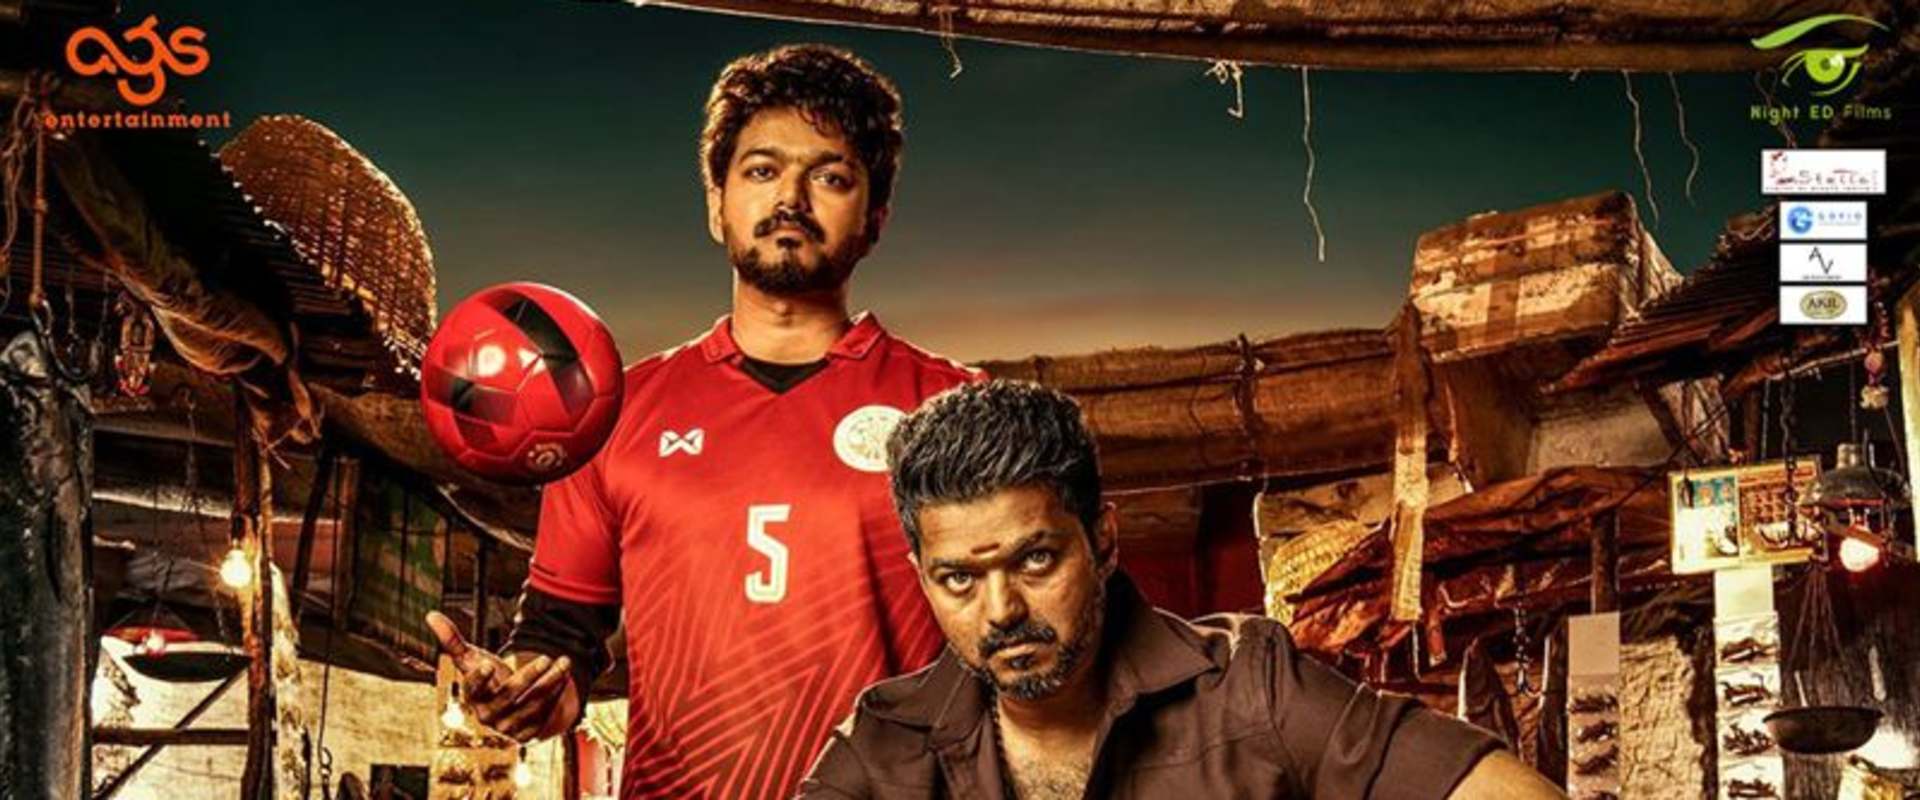 Slow Clap: Why every woman needs to take notes from Vijay's f-lockbuster |  Bigil Latest News- Edexlive